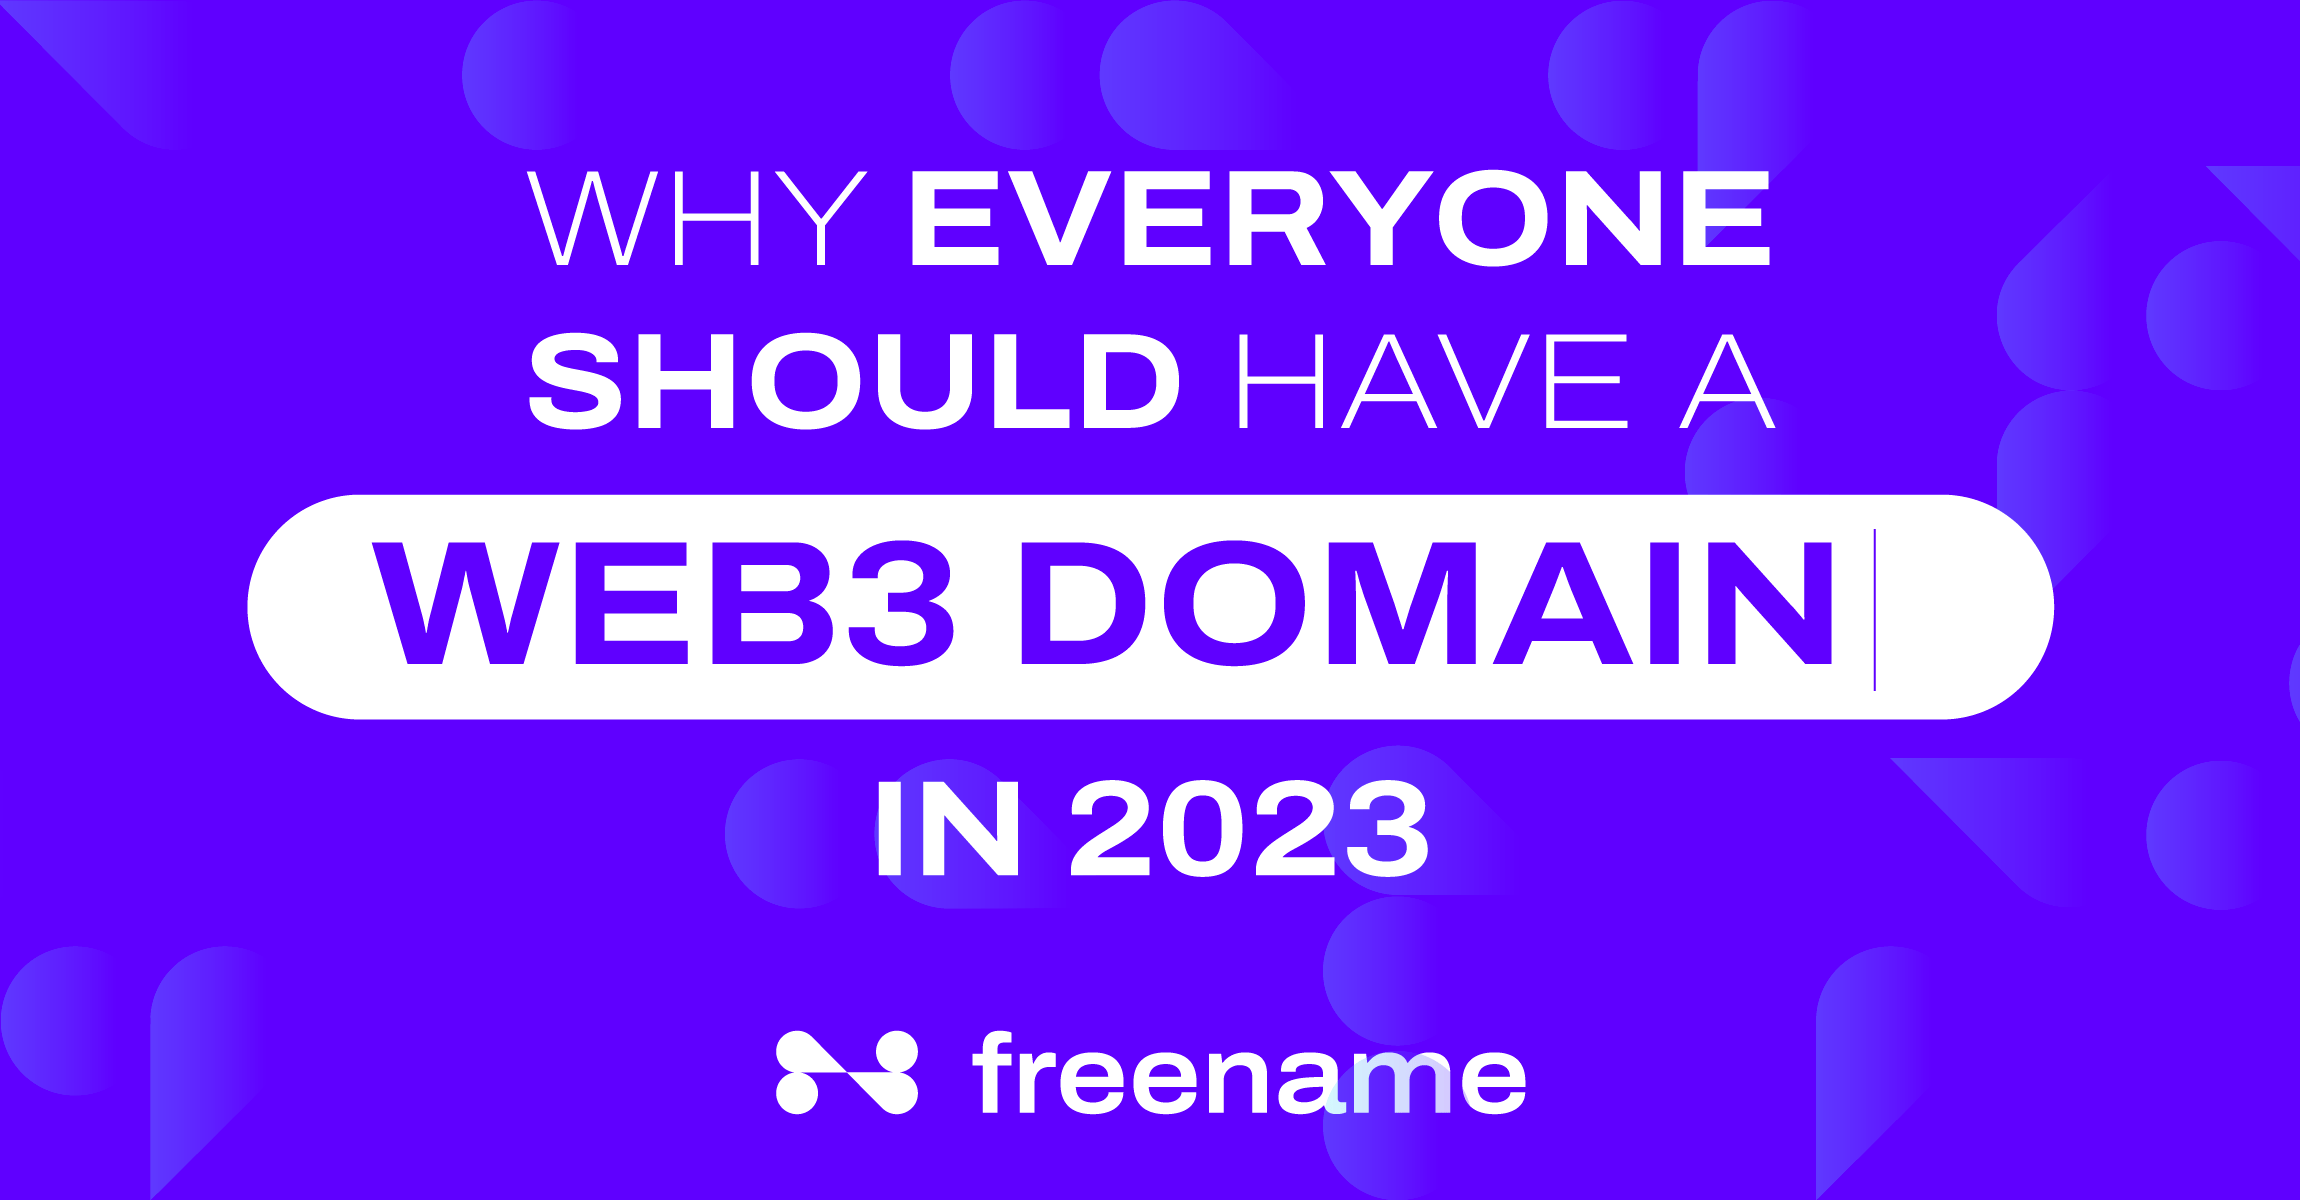 Why Everyone Should Have a Web3 Domain in 2023